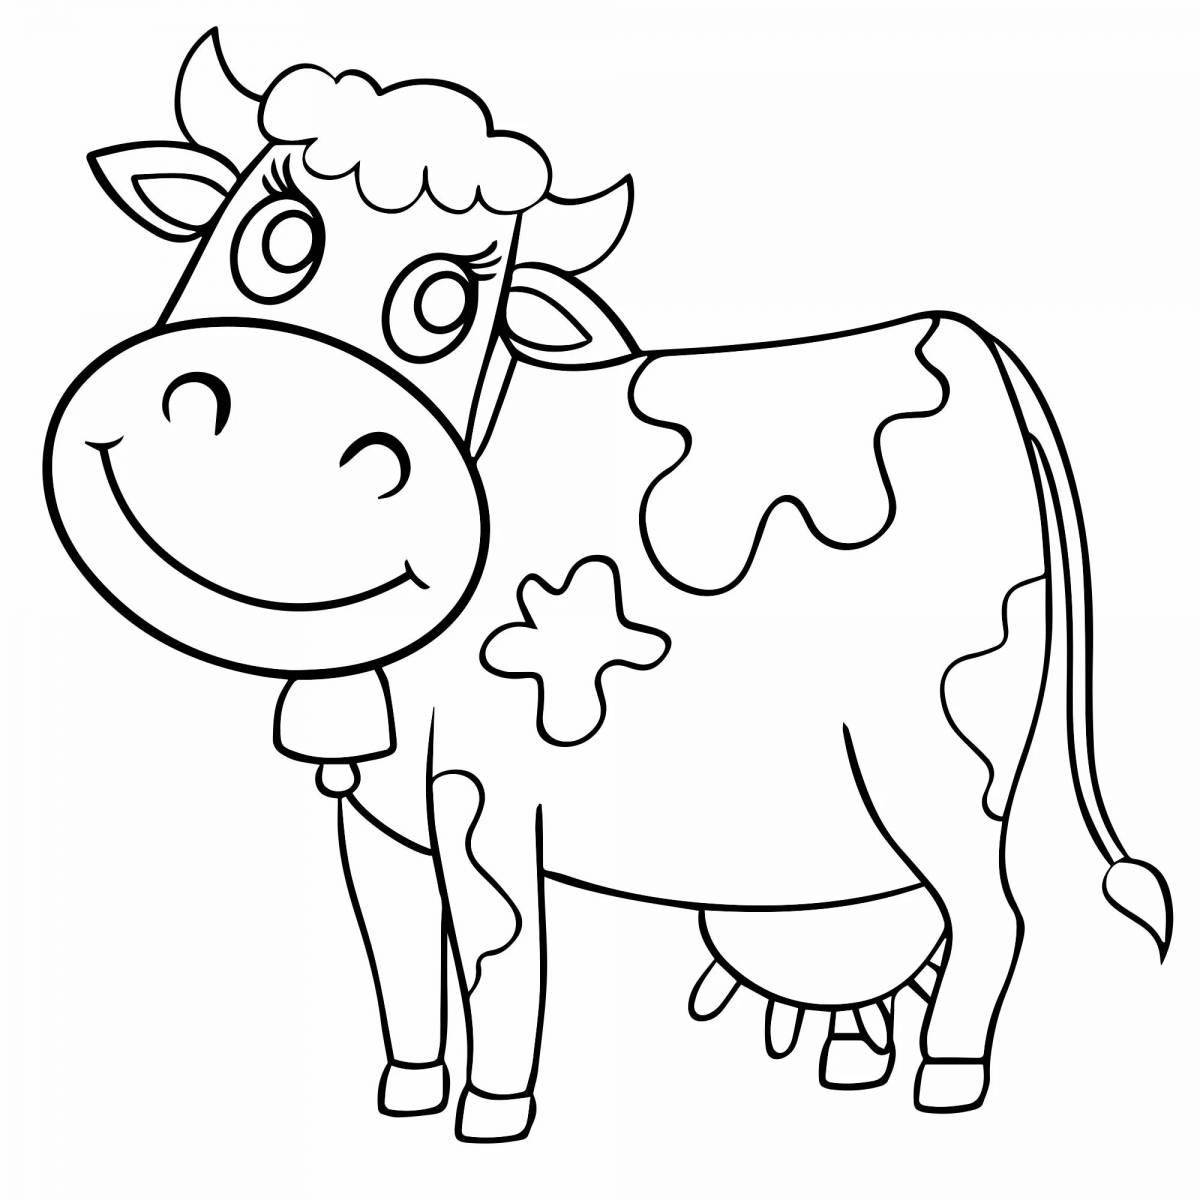 Adorable cow coloring page for 5-6 year olds